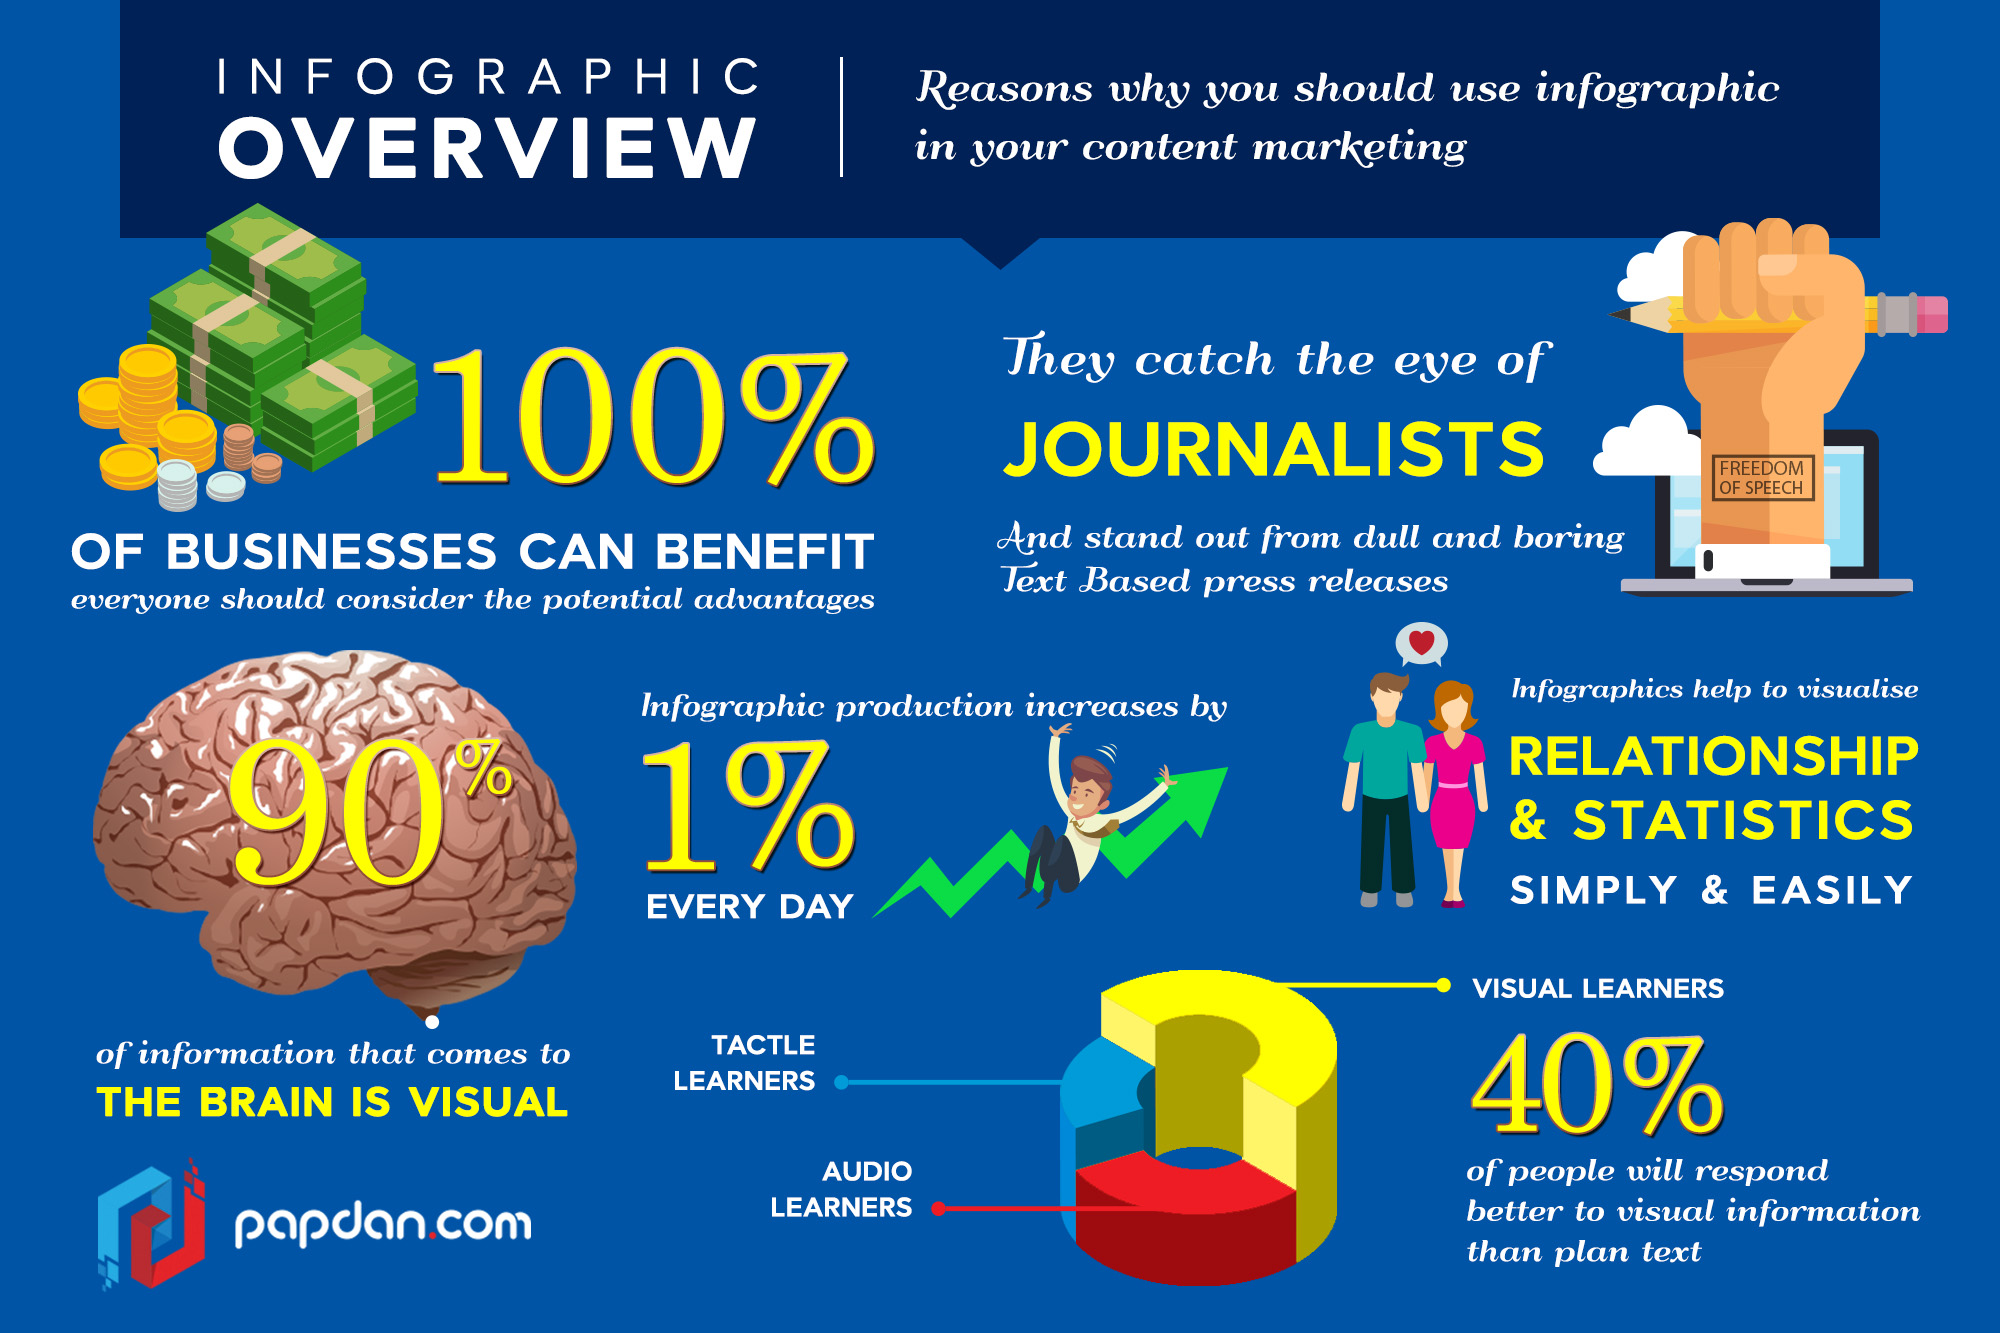 Infographic Overview: Reasons Why You Should Use Infographic in Your Content Marketing